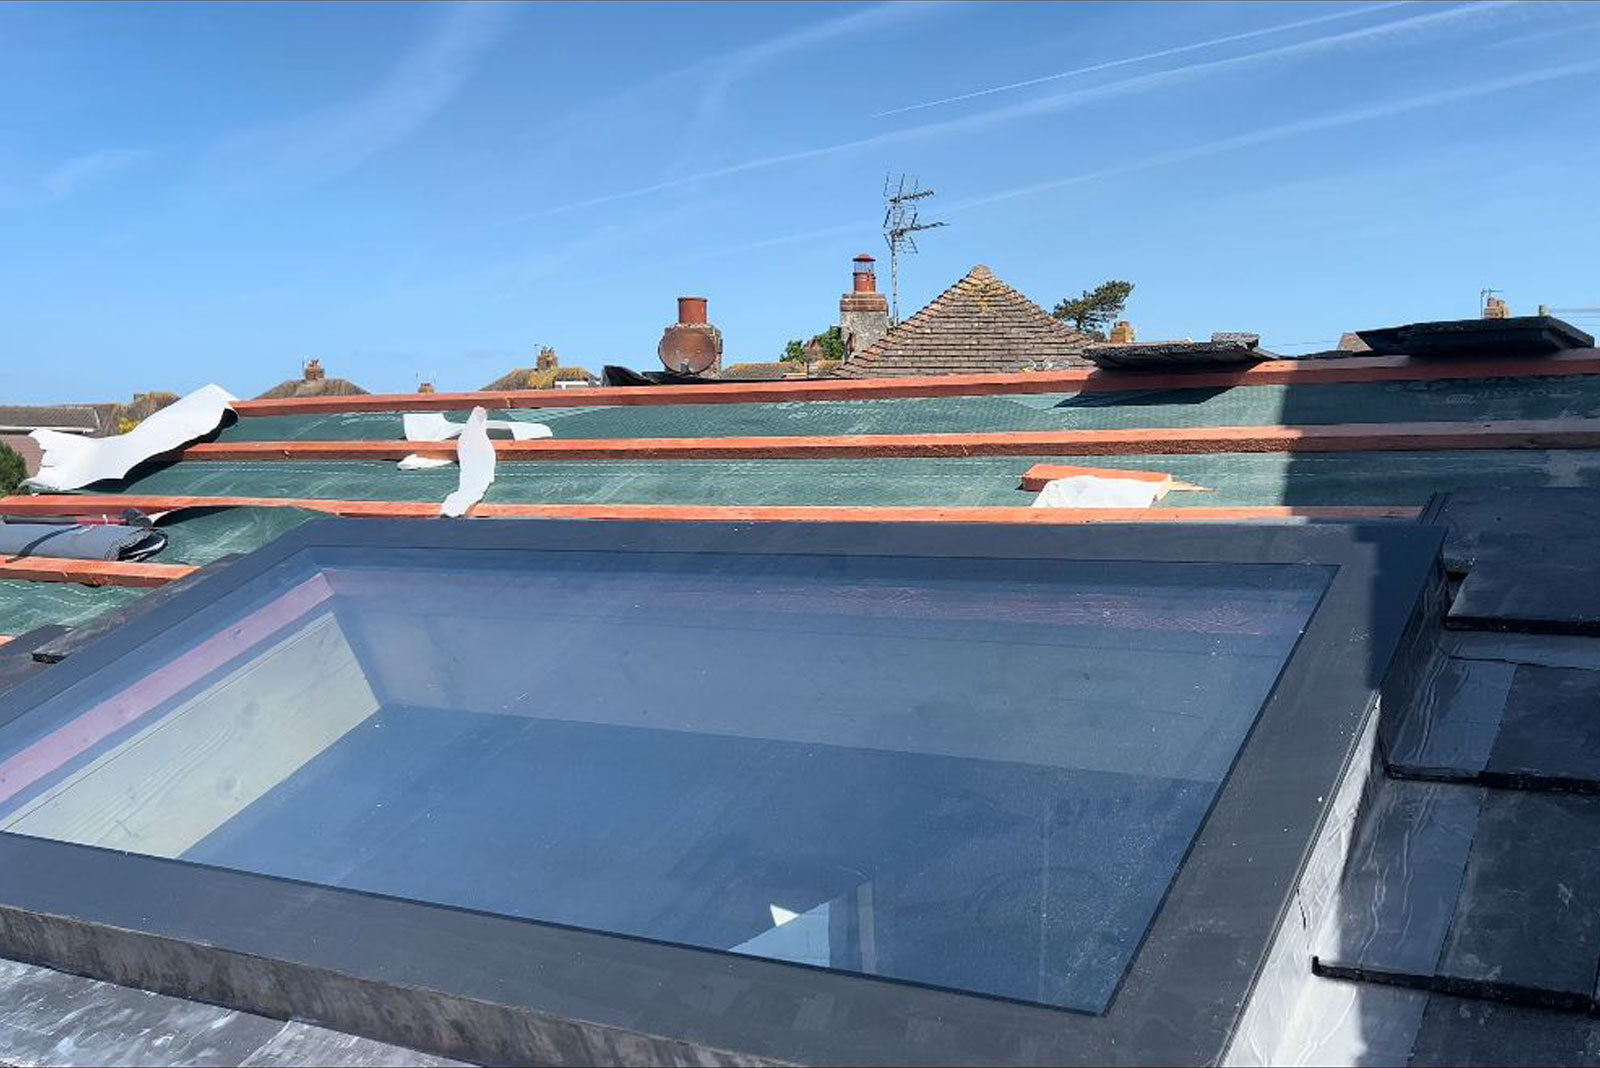 Pitched Roof Skylight 500 x 500mm